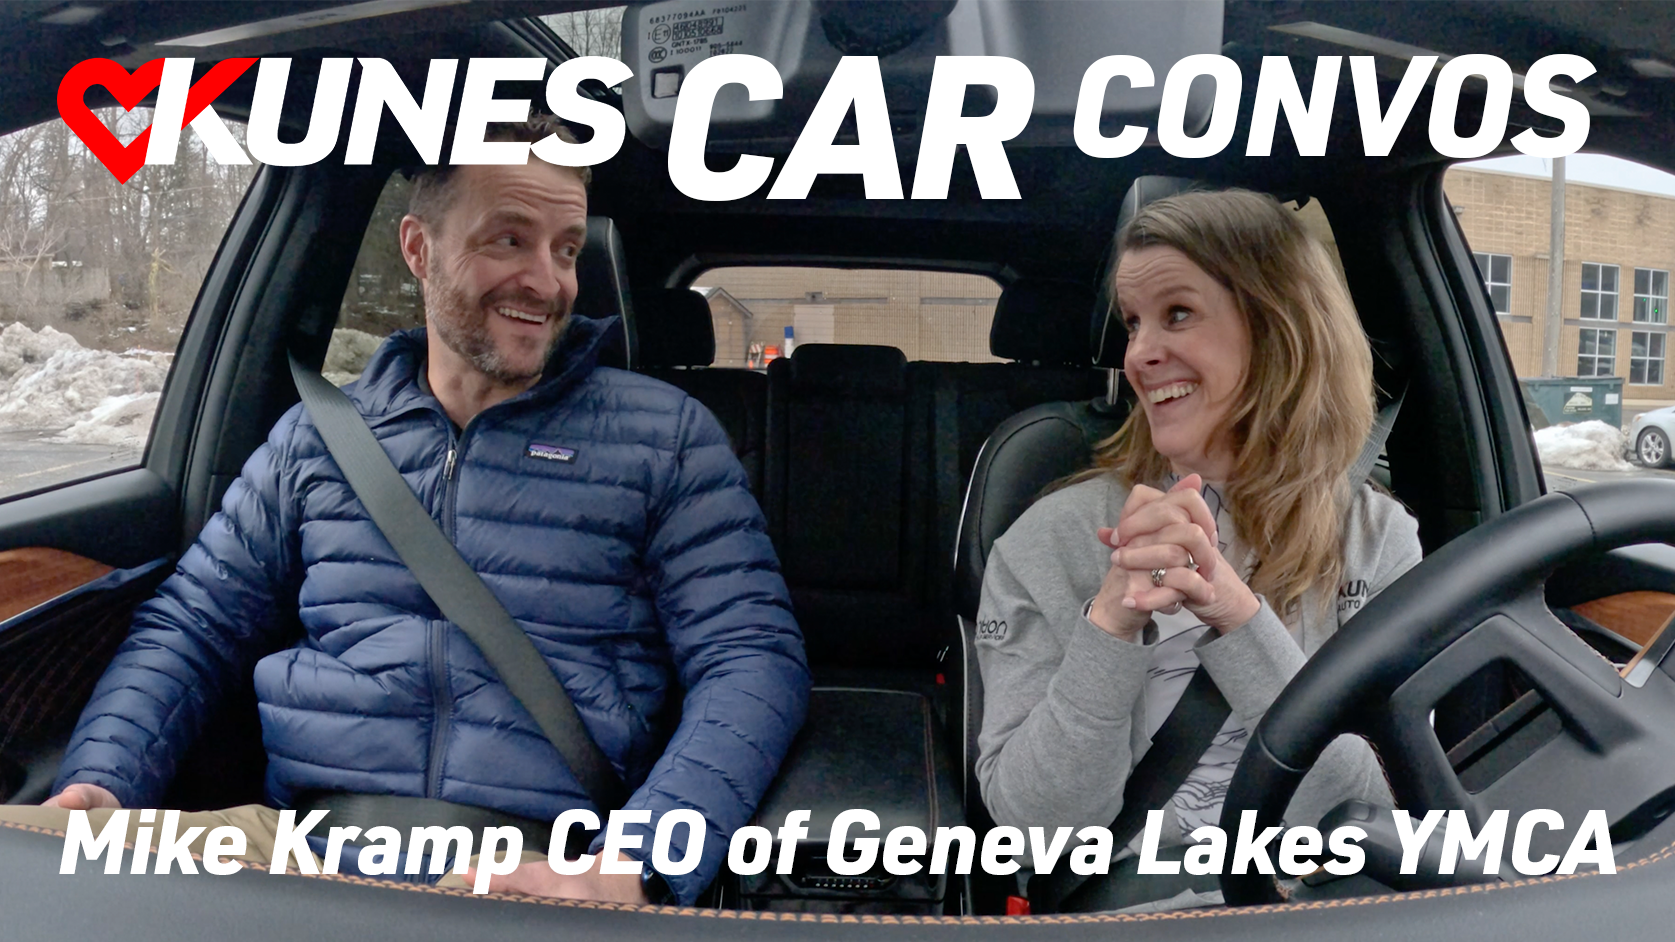 Text reads: Kunes Car Convos; Mike Kramp CEO of Geneva Lakes YMCA
Photo: Mike Kramp, CEO of Geneva Lakes YMCA, and Jen Myers, Marketing Director of Kunes Auto & RV Group, smile at each other while driving in a 2023 Grand Cherokee 4XE